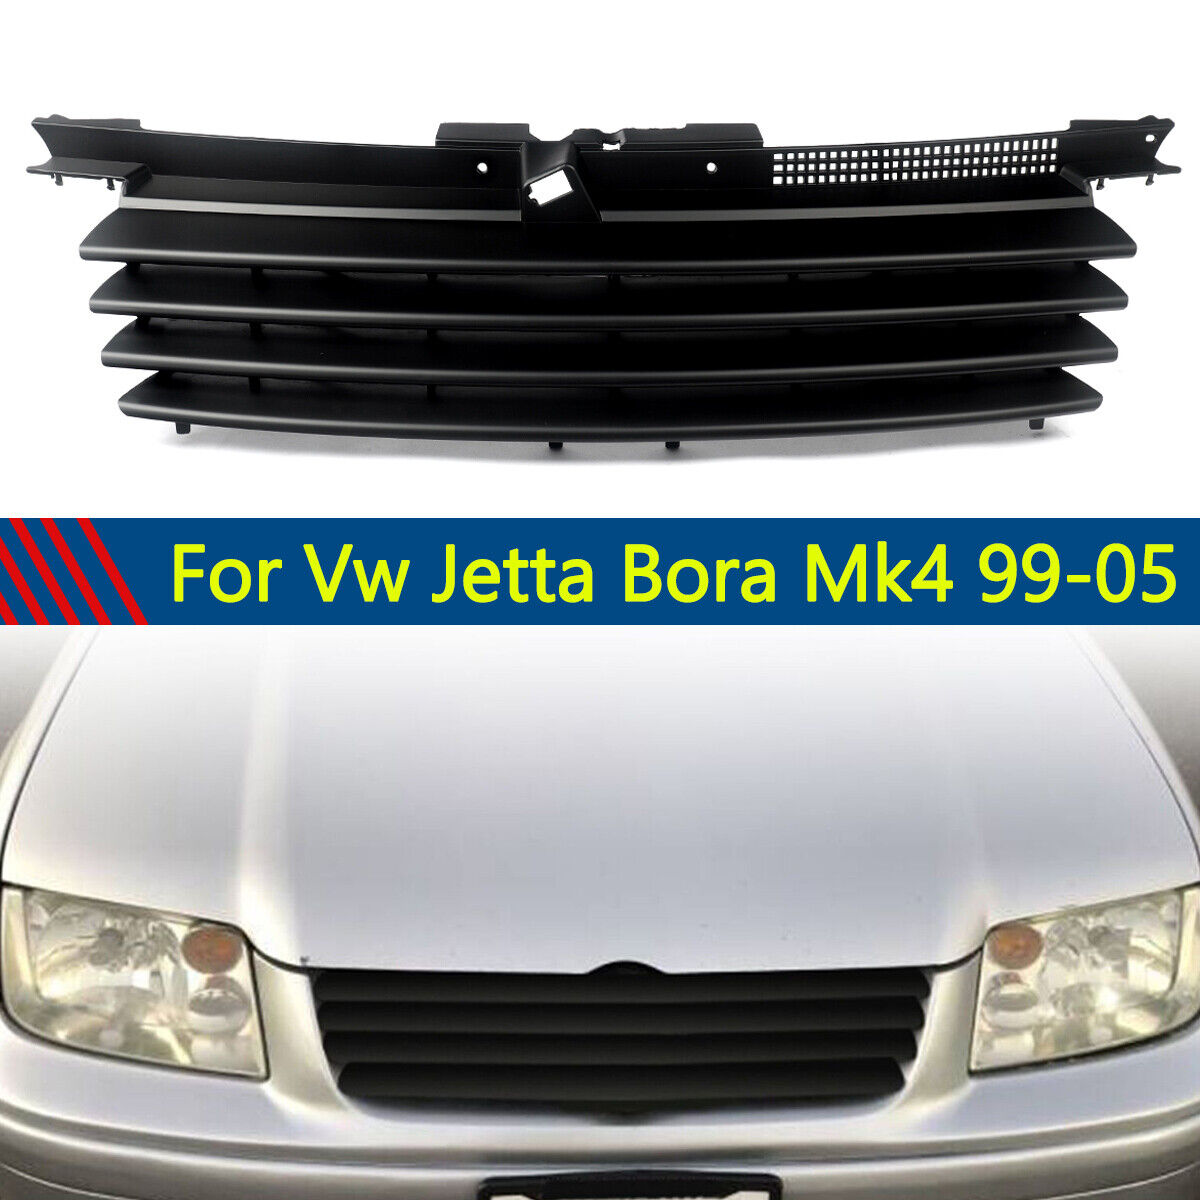 Fit For 1999-2005 VW Jetta Bora Mk4 Front Badgeless Bumper Grill Grille Black